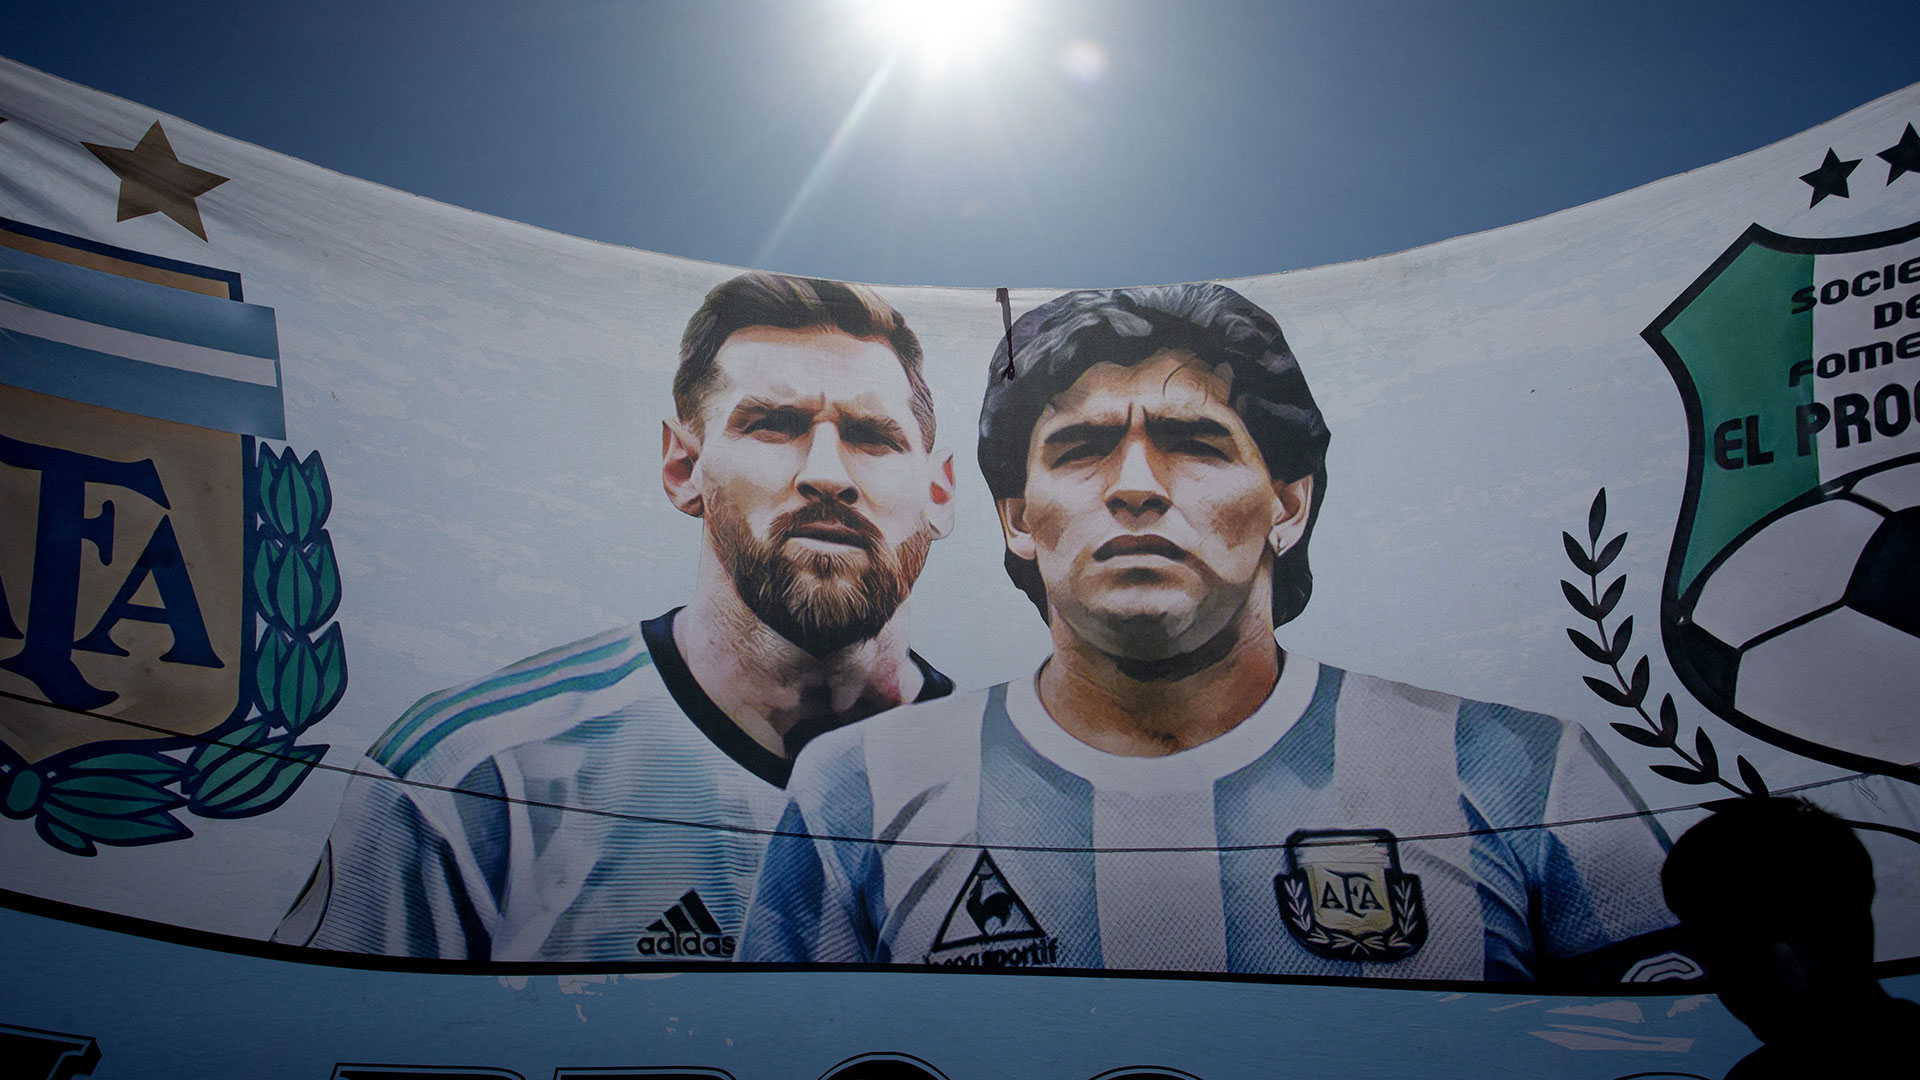 Soccer Football - FIFA World Cup Qatar 2022 - Argentina Victory Parade after winning the World Cup - Buenos Aires, Argentina - December 20, 2022 General view as a banner of Argentina's Lionel Messi and former player Diego Maradona is seen ahead of the victory parade REUTERS/ Gonzalo Colini DO NOT RESOLVE.  DO NOT ARCHIVE.